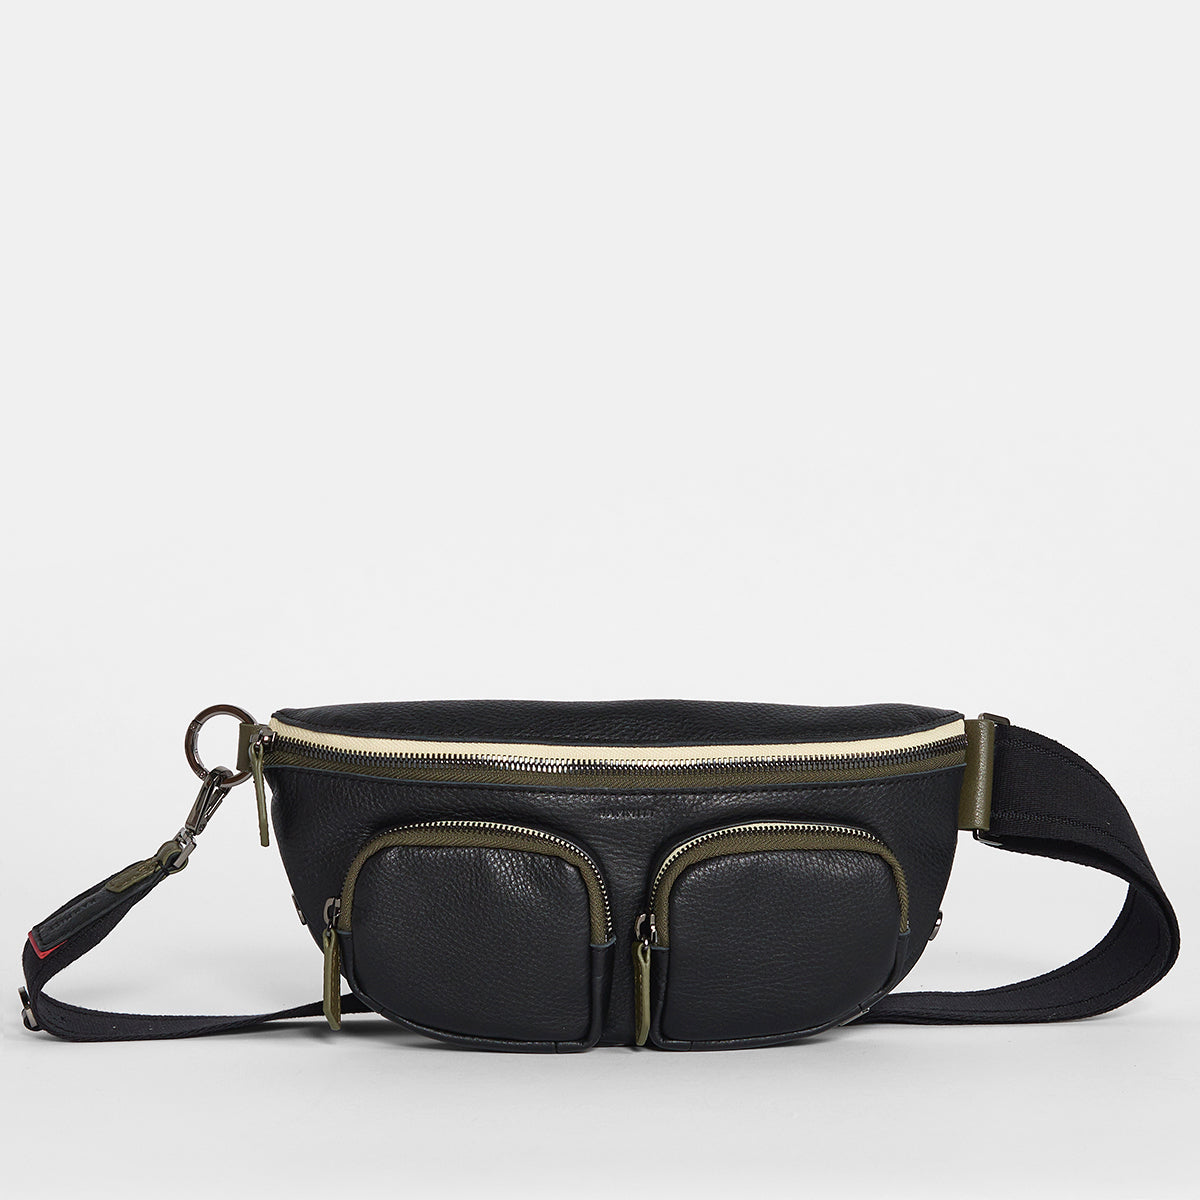 Charles-Crossbody-Cargo-Black-Front-View